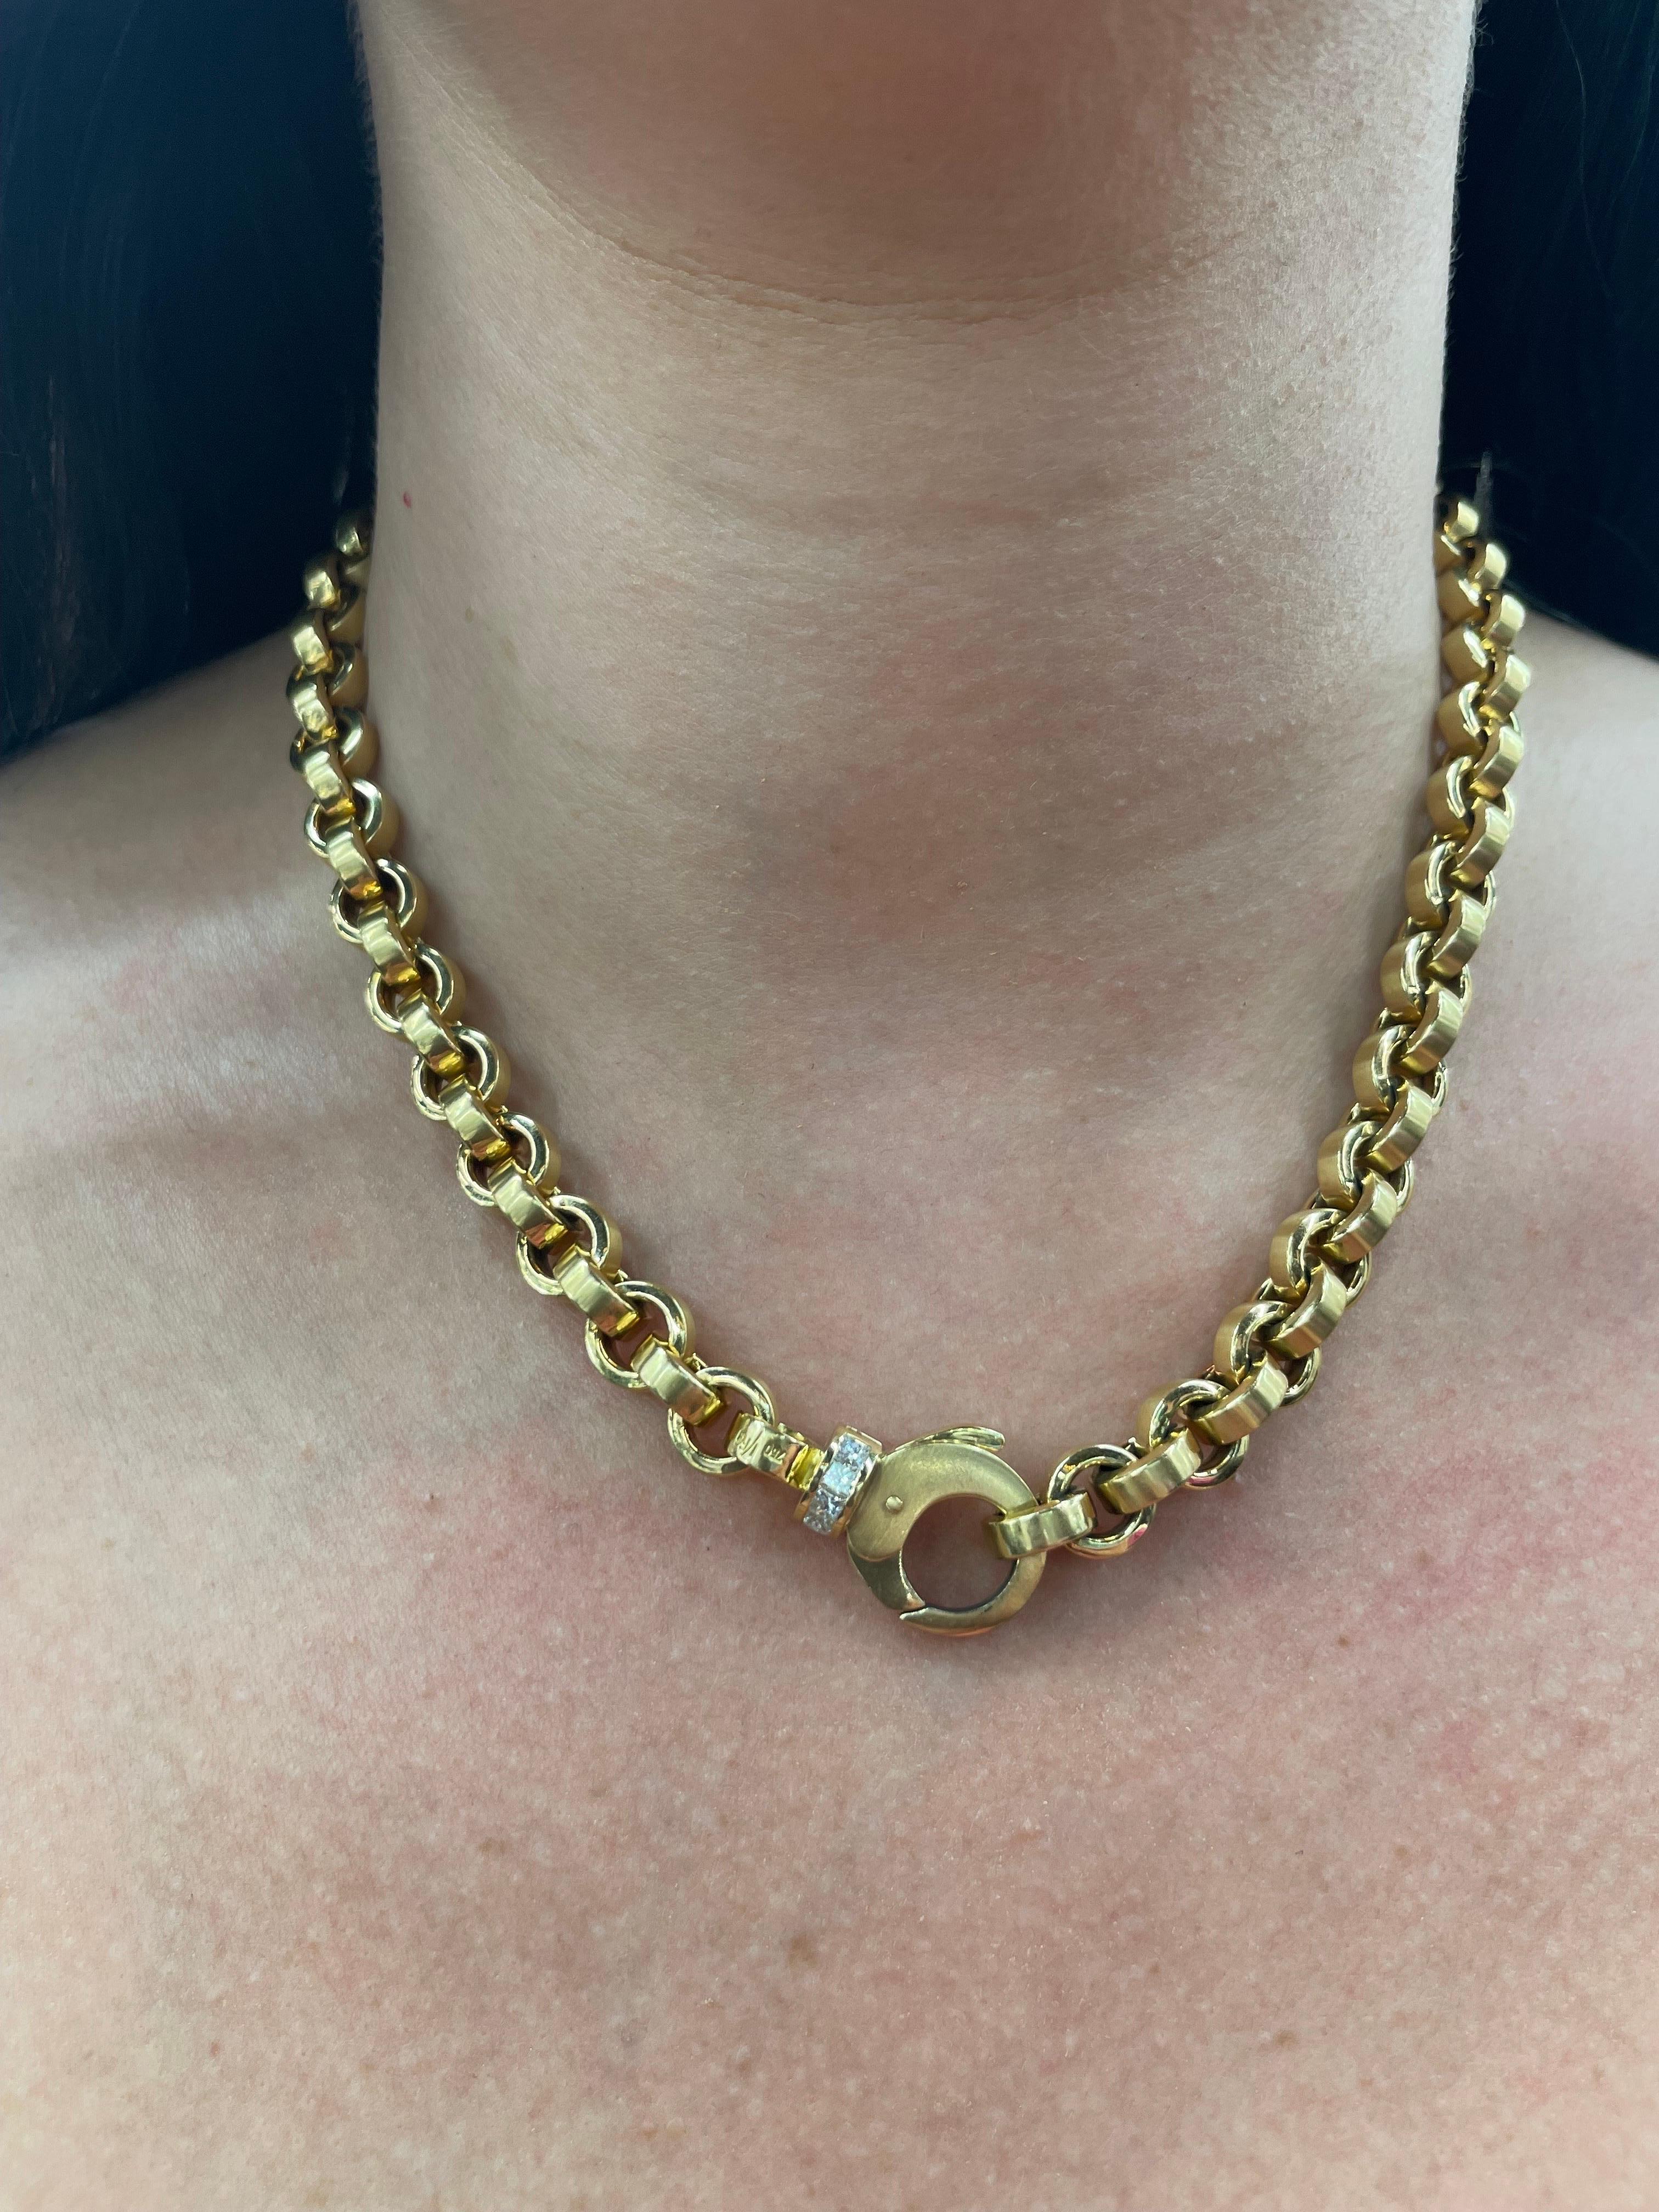 18 Karat Yellow Gold necklace featuring 82 alternating polished & brushed finished links weighing 89.7 Grams with 9 Princess Cut diamonds weighing 0.72 Carats. Signed I/FA 750